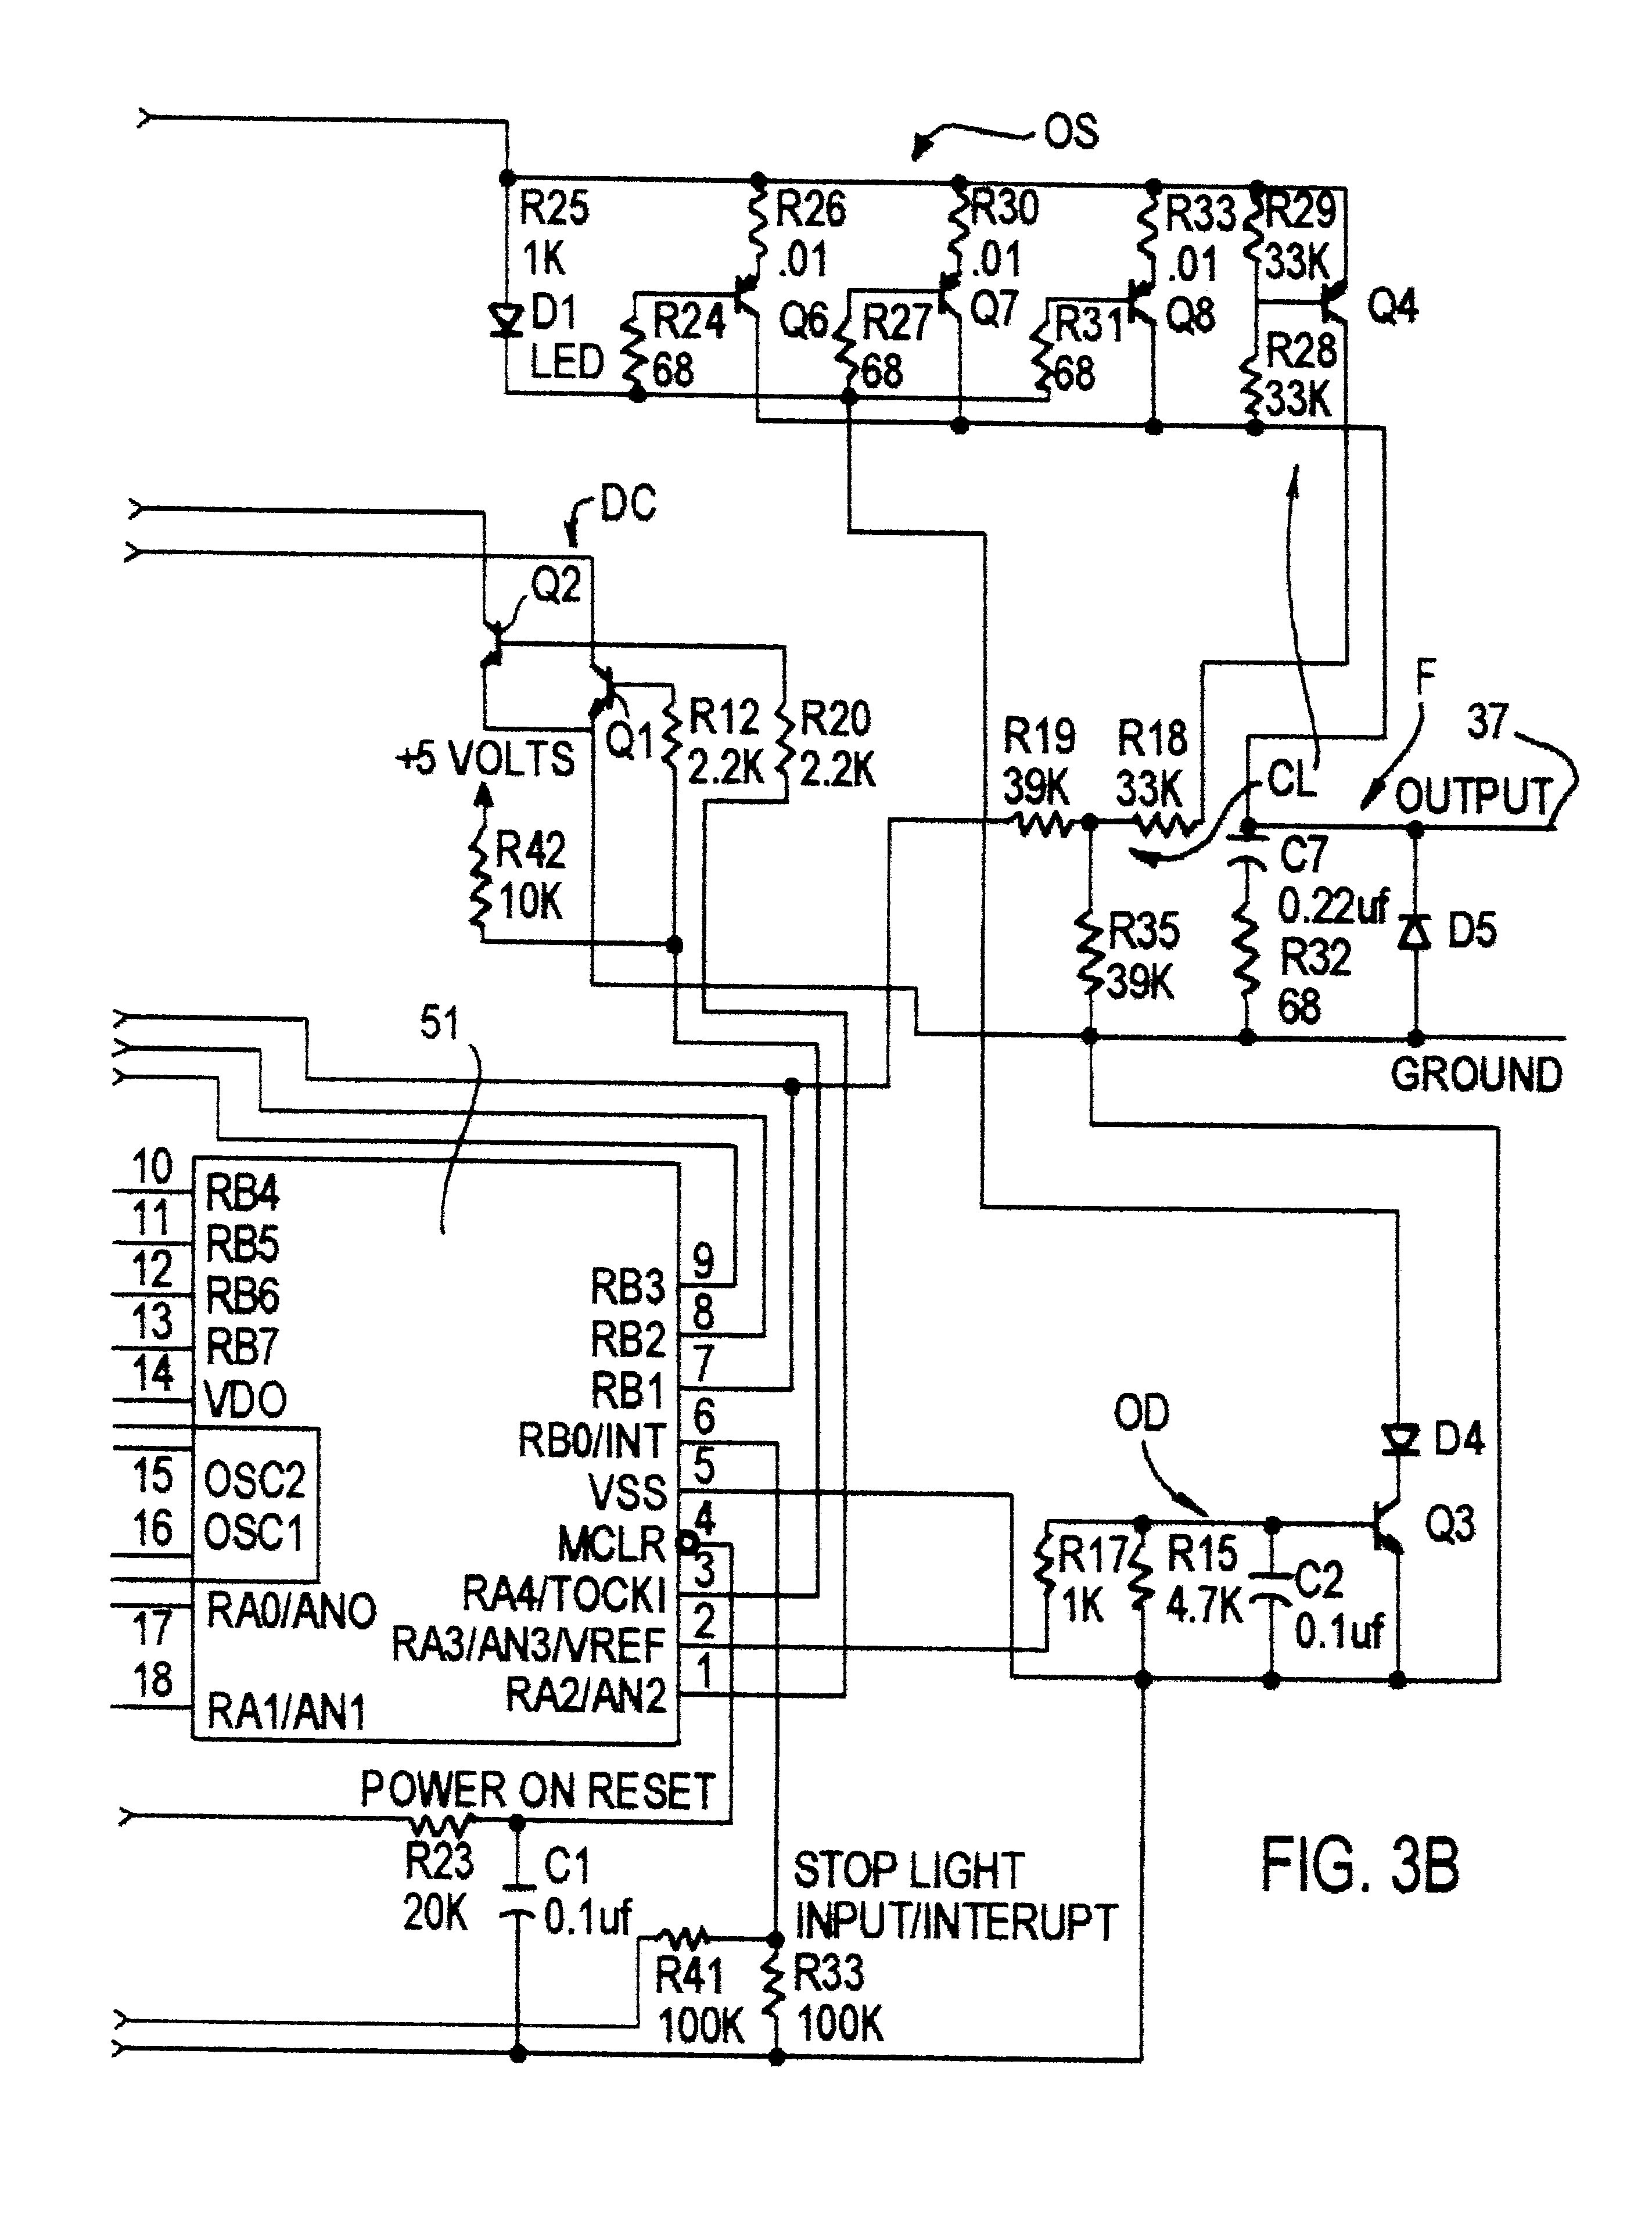 Trailer Wiring Diagram Related Post